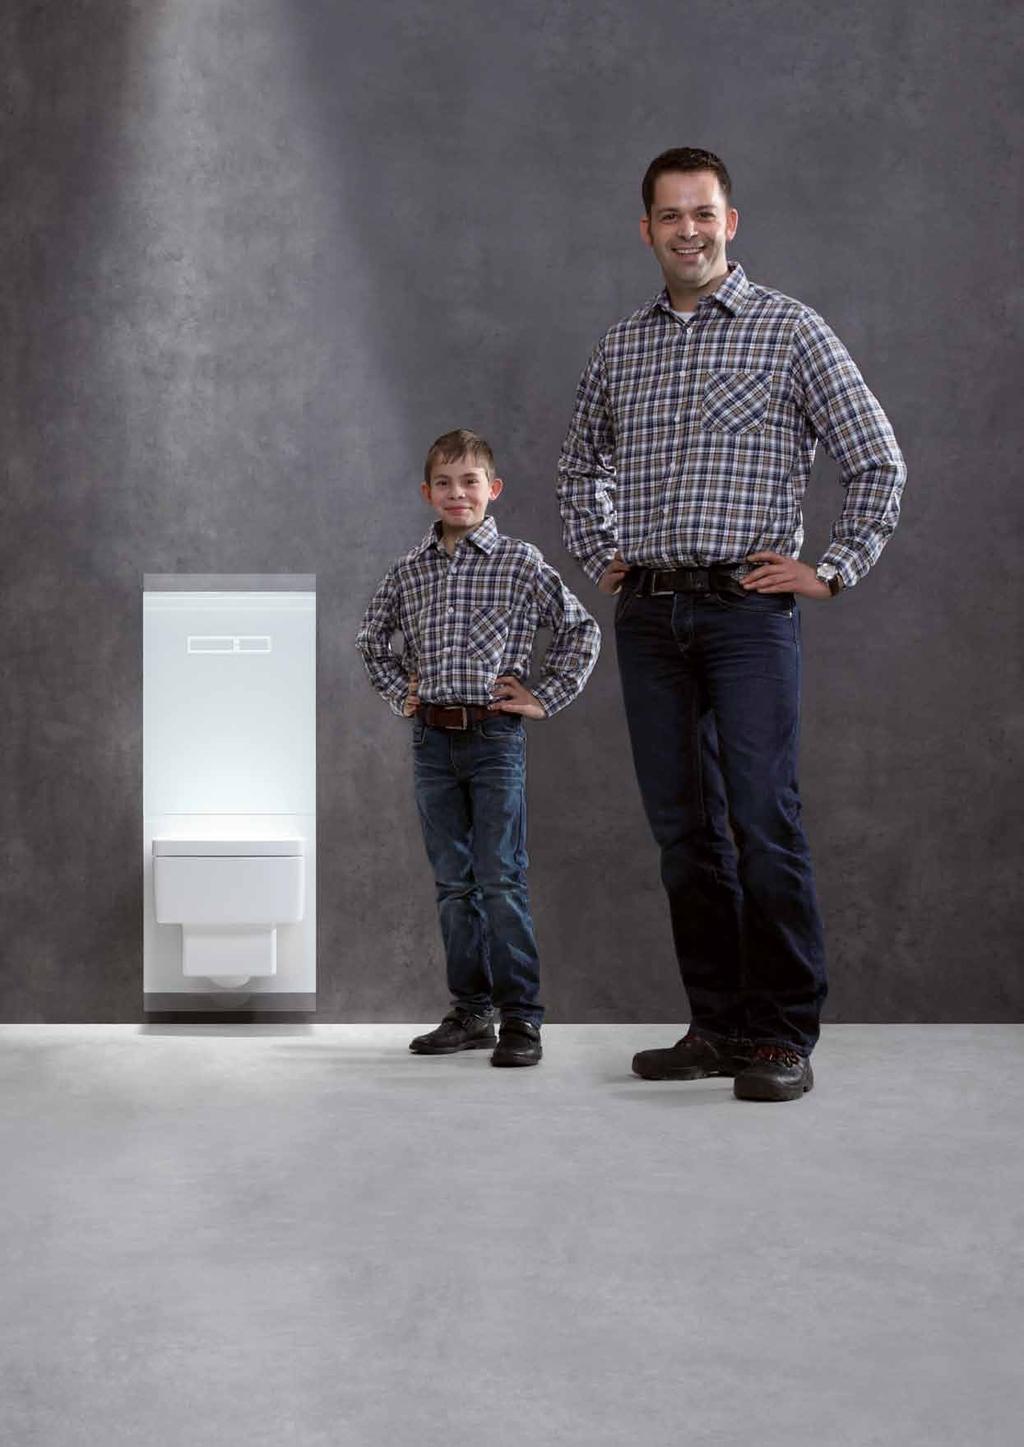 TECElu "m-lift" TECElu "m-lift" the toilet for large and small TECElu enables you to adjust the height of the